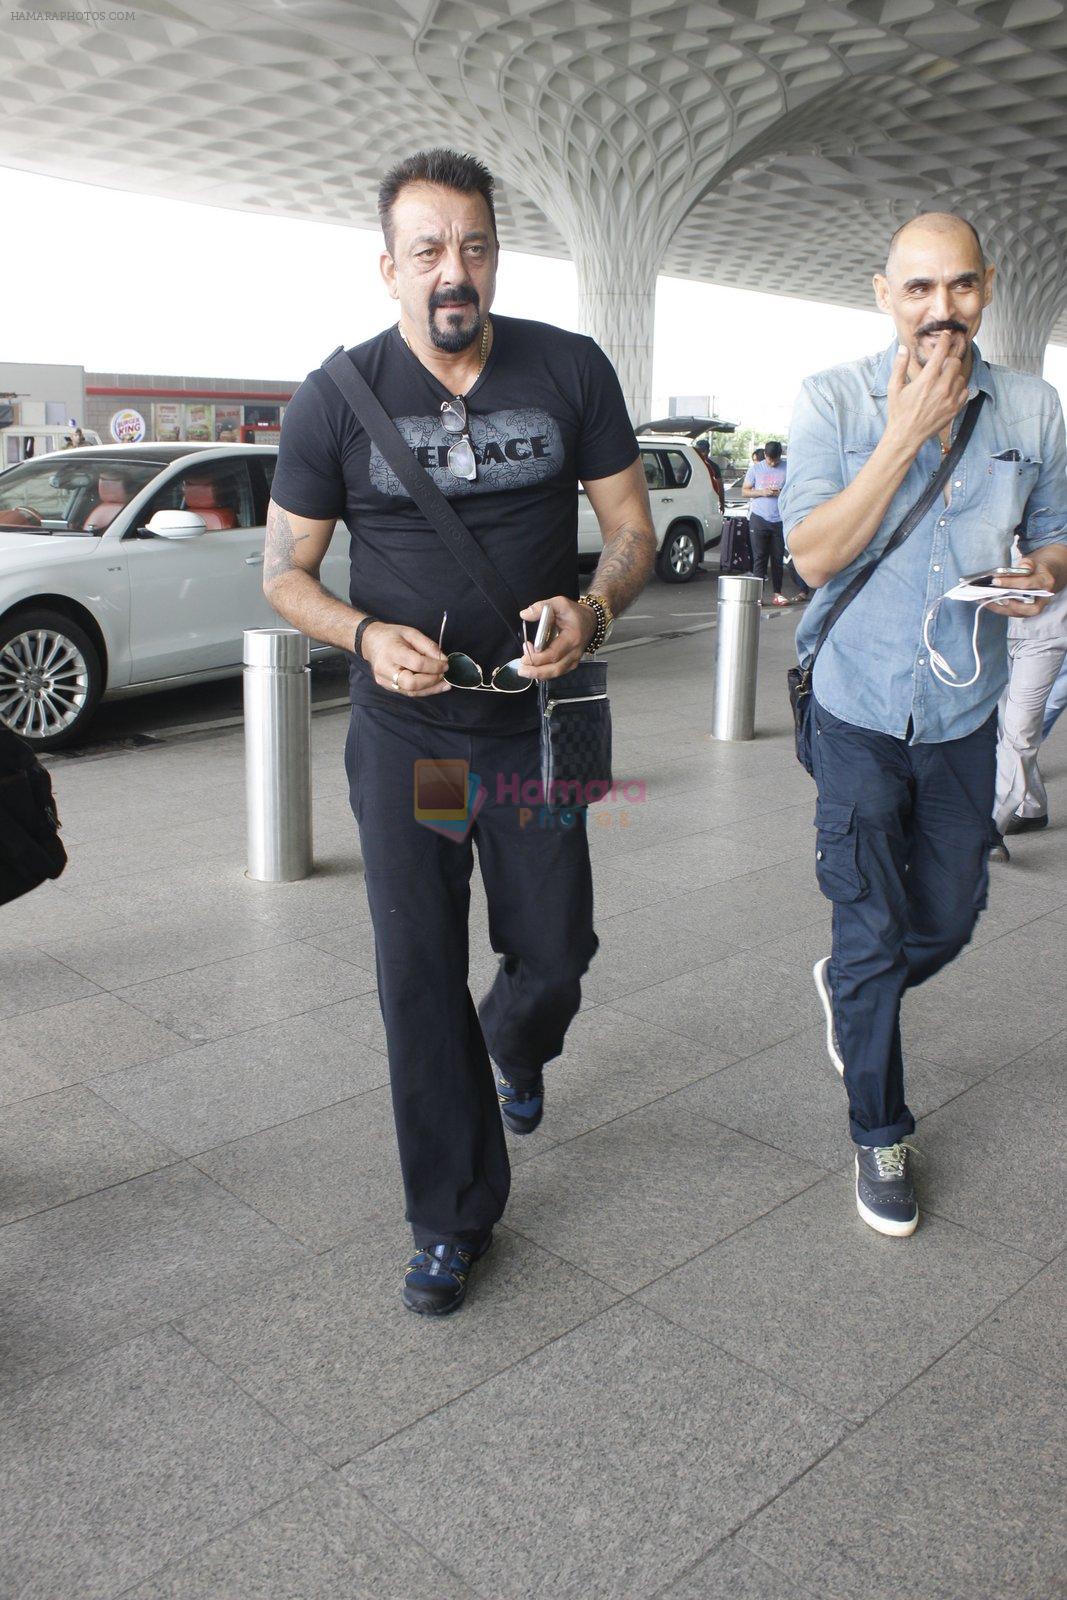 Sanjay Dutt snapped at airport in Mumbai on 16th July 2016